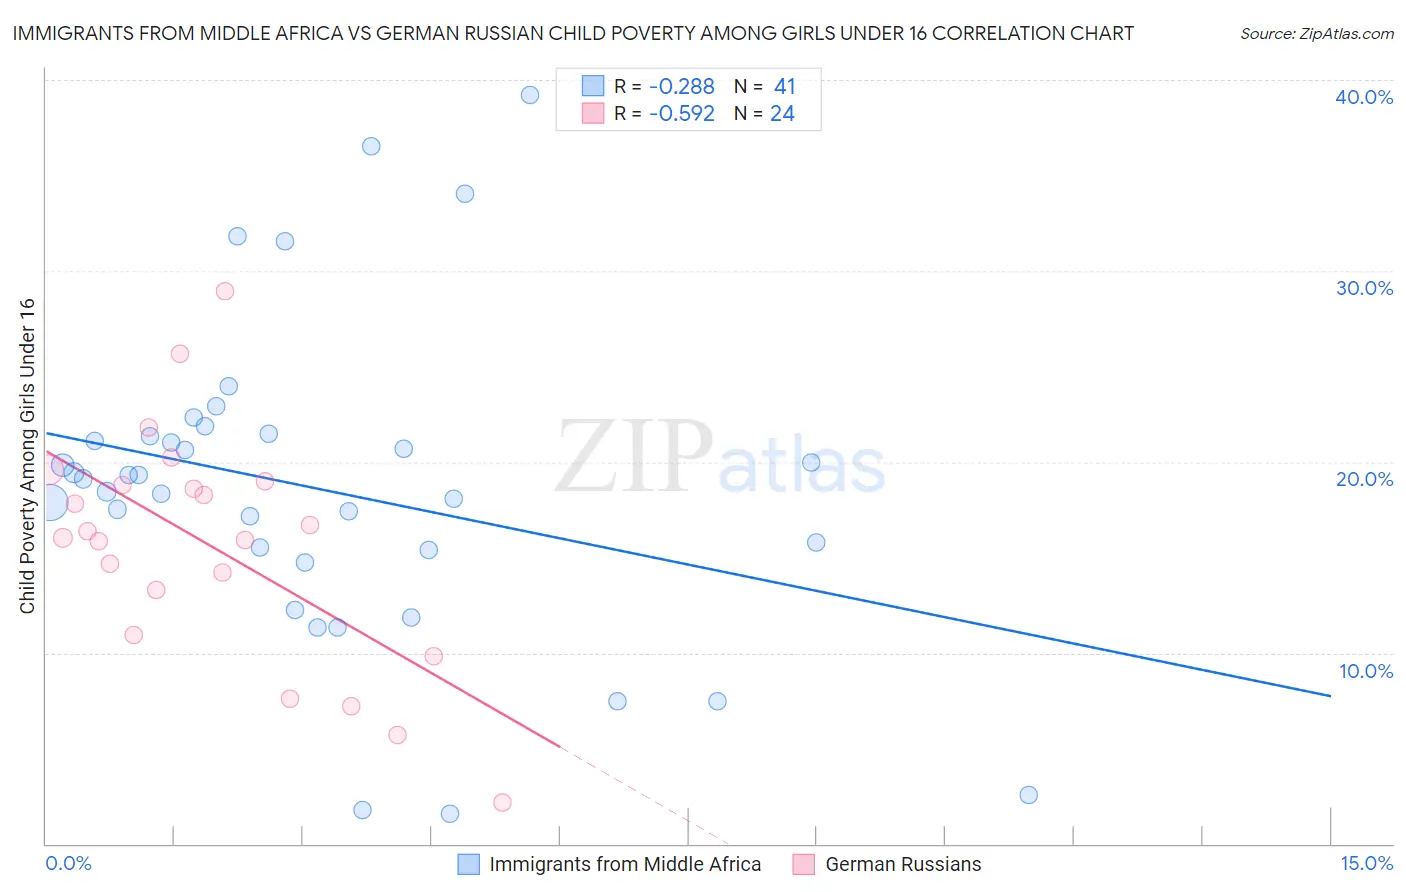 Immigrants from Middle Africa vs German Russian Child Poverty Among Girls Under 16